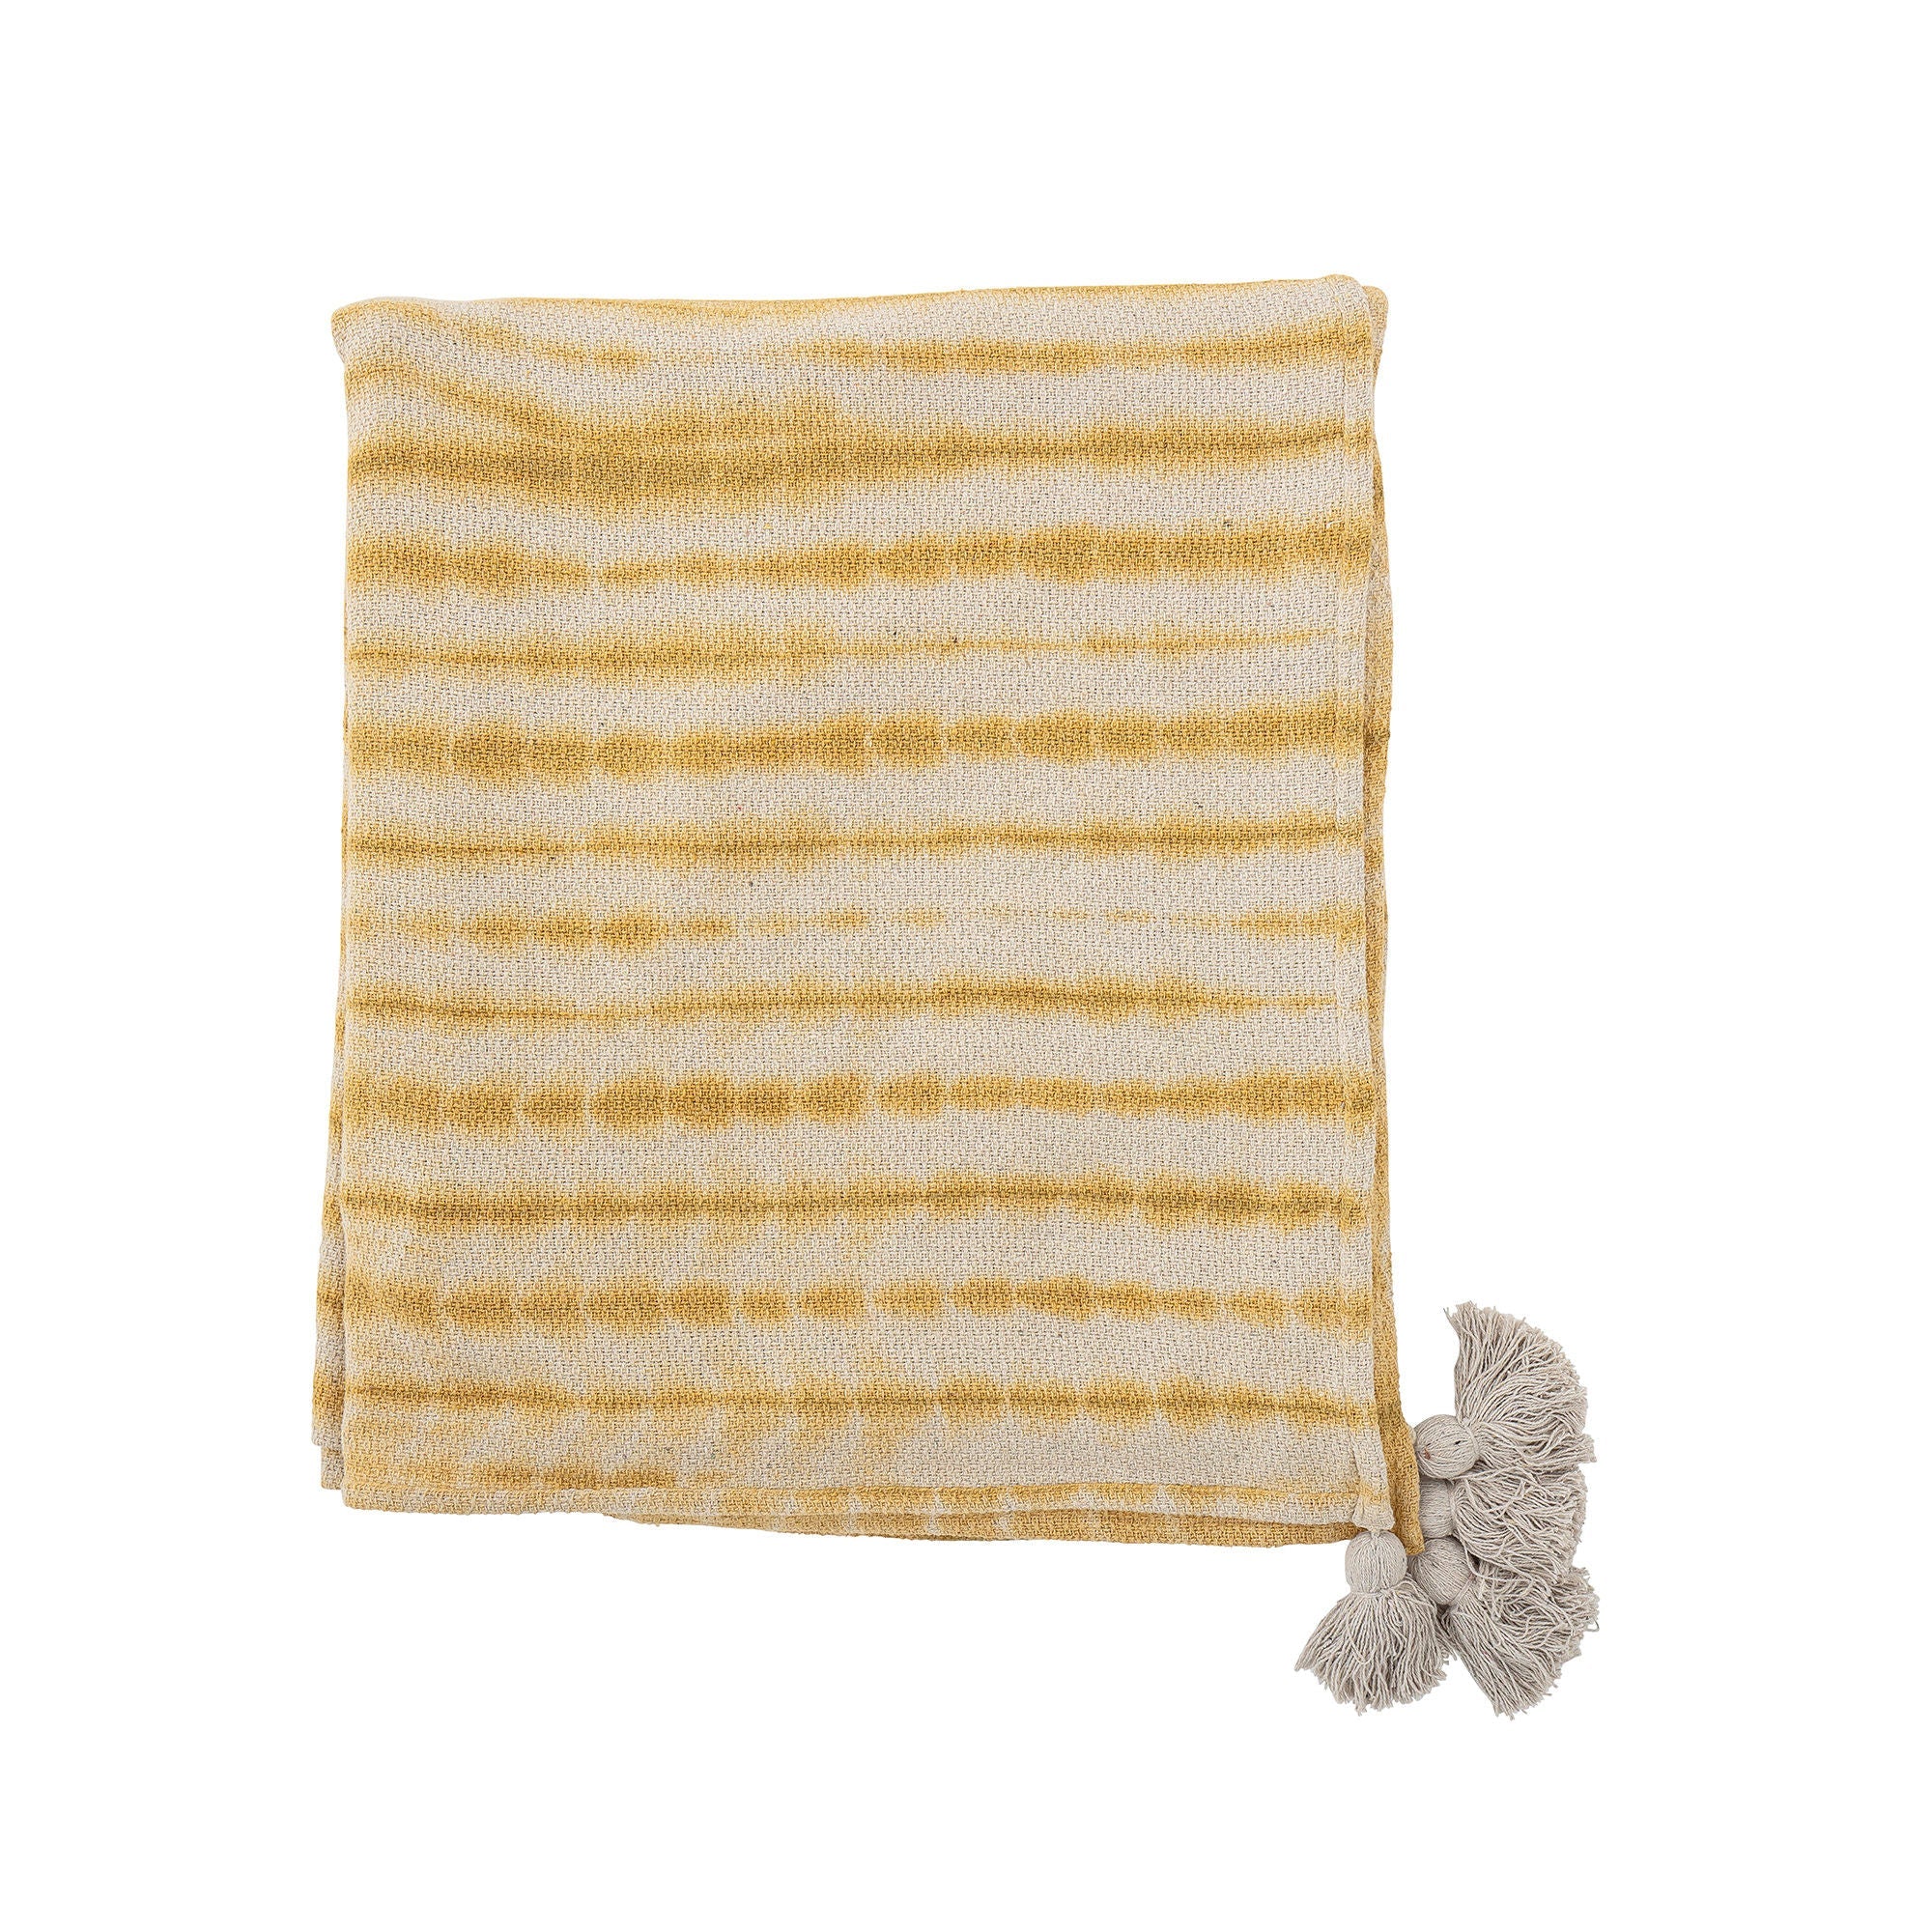 Bloomingville Decia Bedspread, Yellow, Recycled Cotton